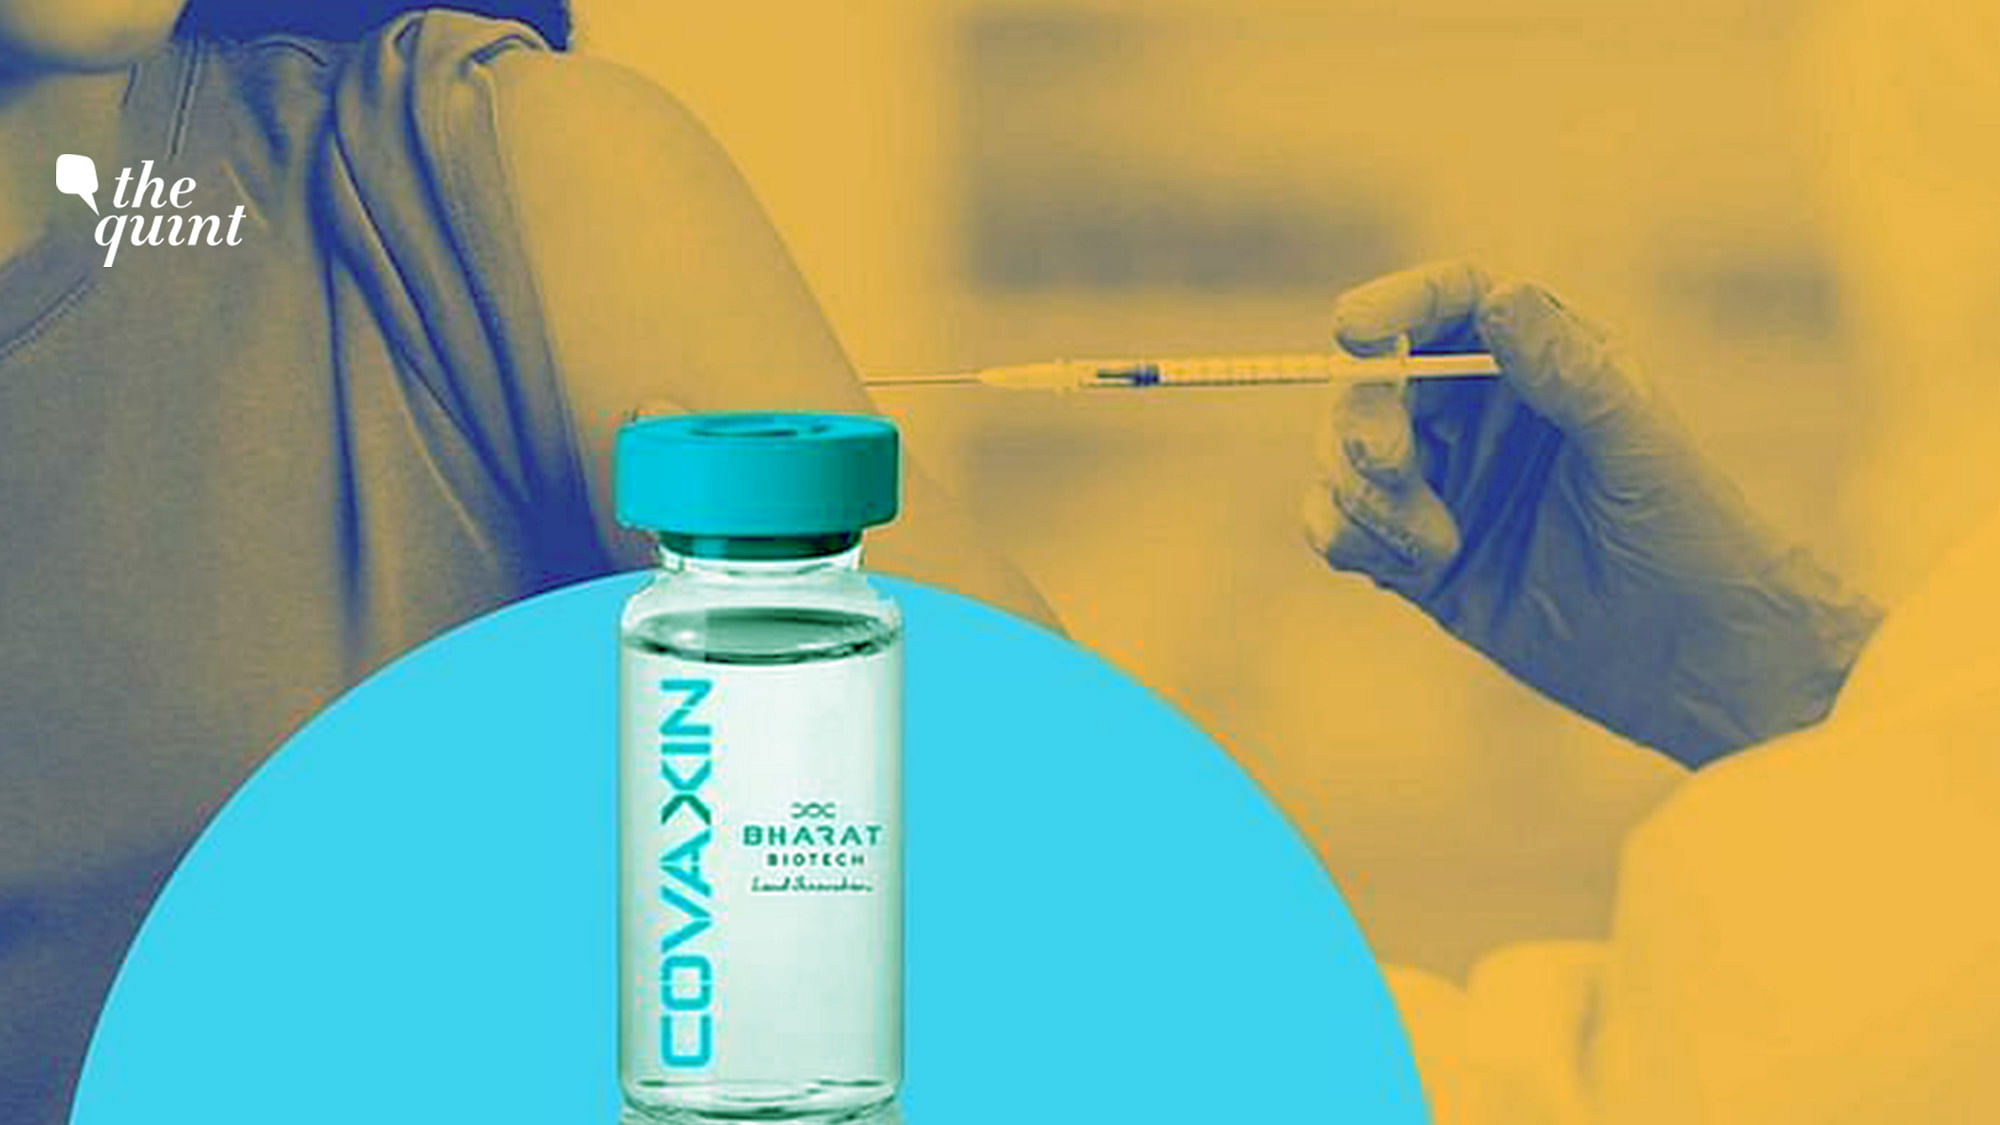 Bharat Biotech has applied to the World Health Organization (WHO) for the Emergency Use Listing (EUL) of its COVID vaccine, Covaxin.